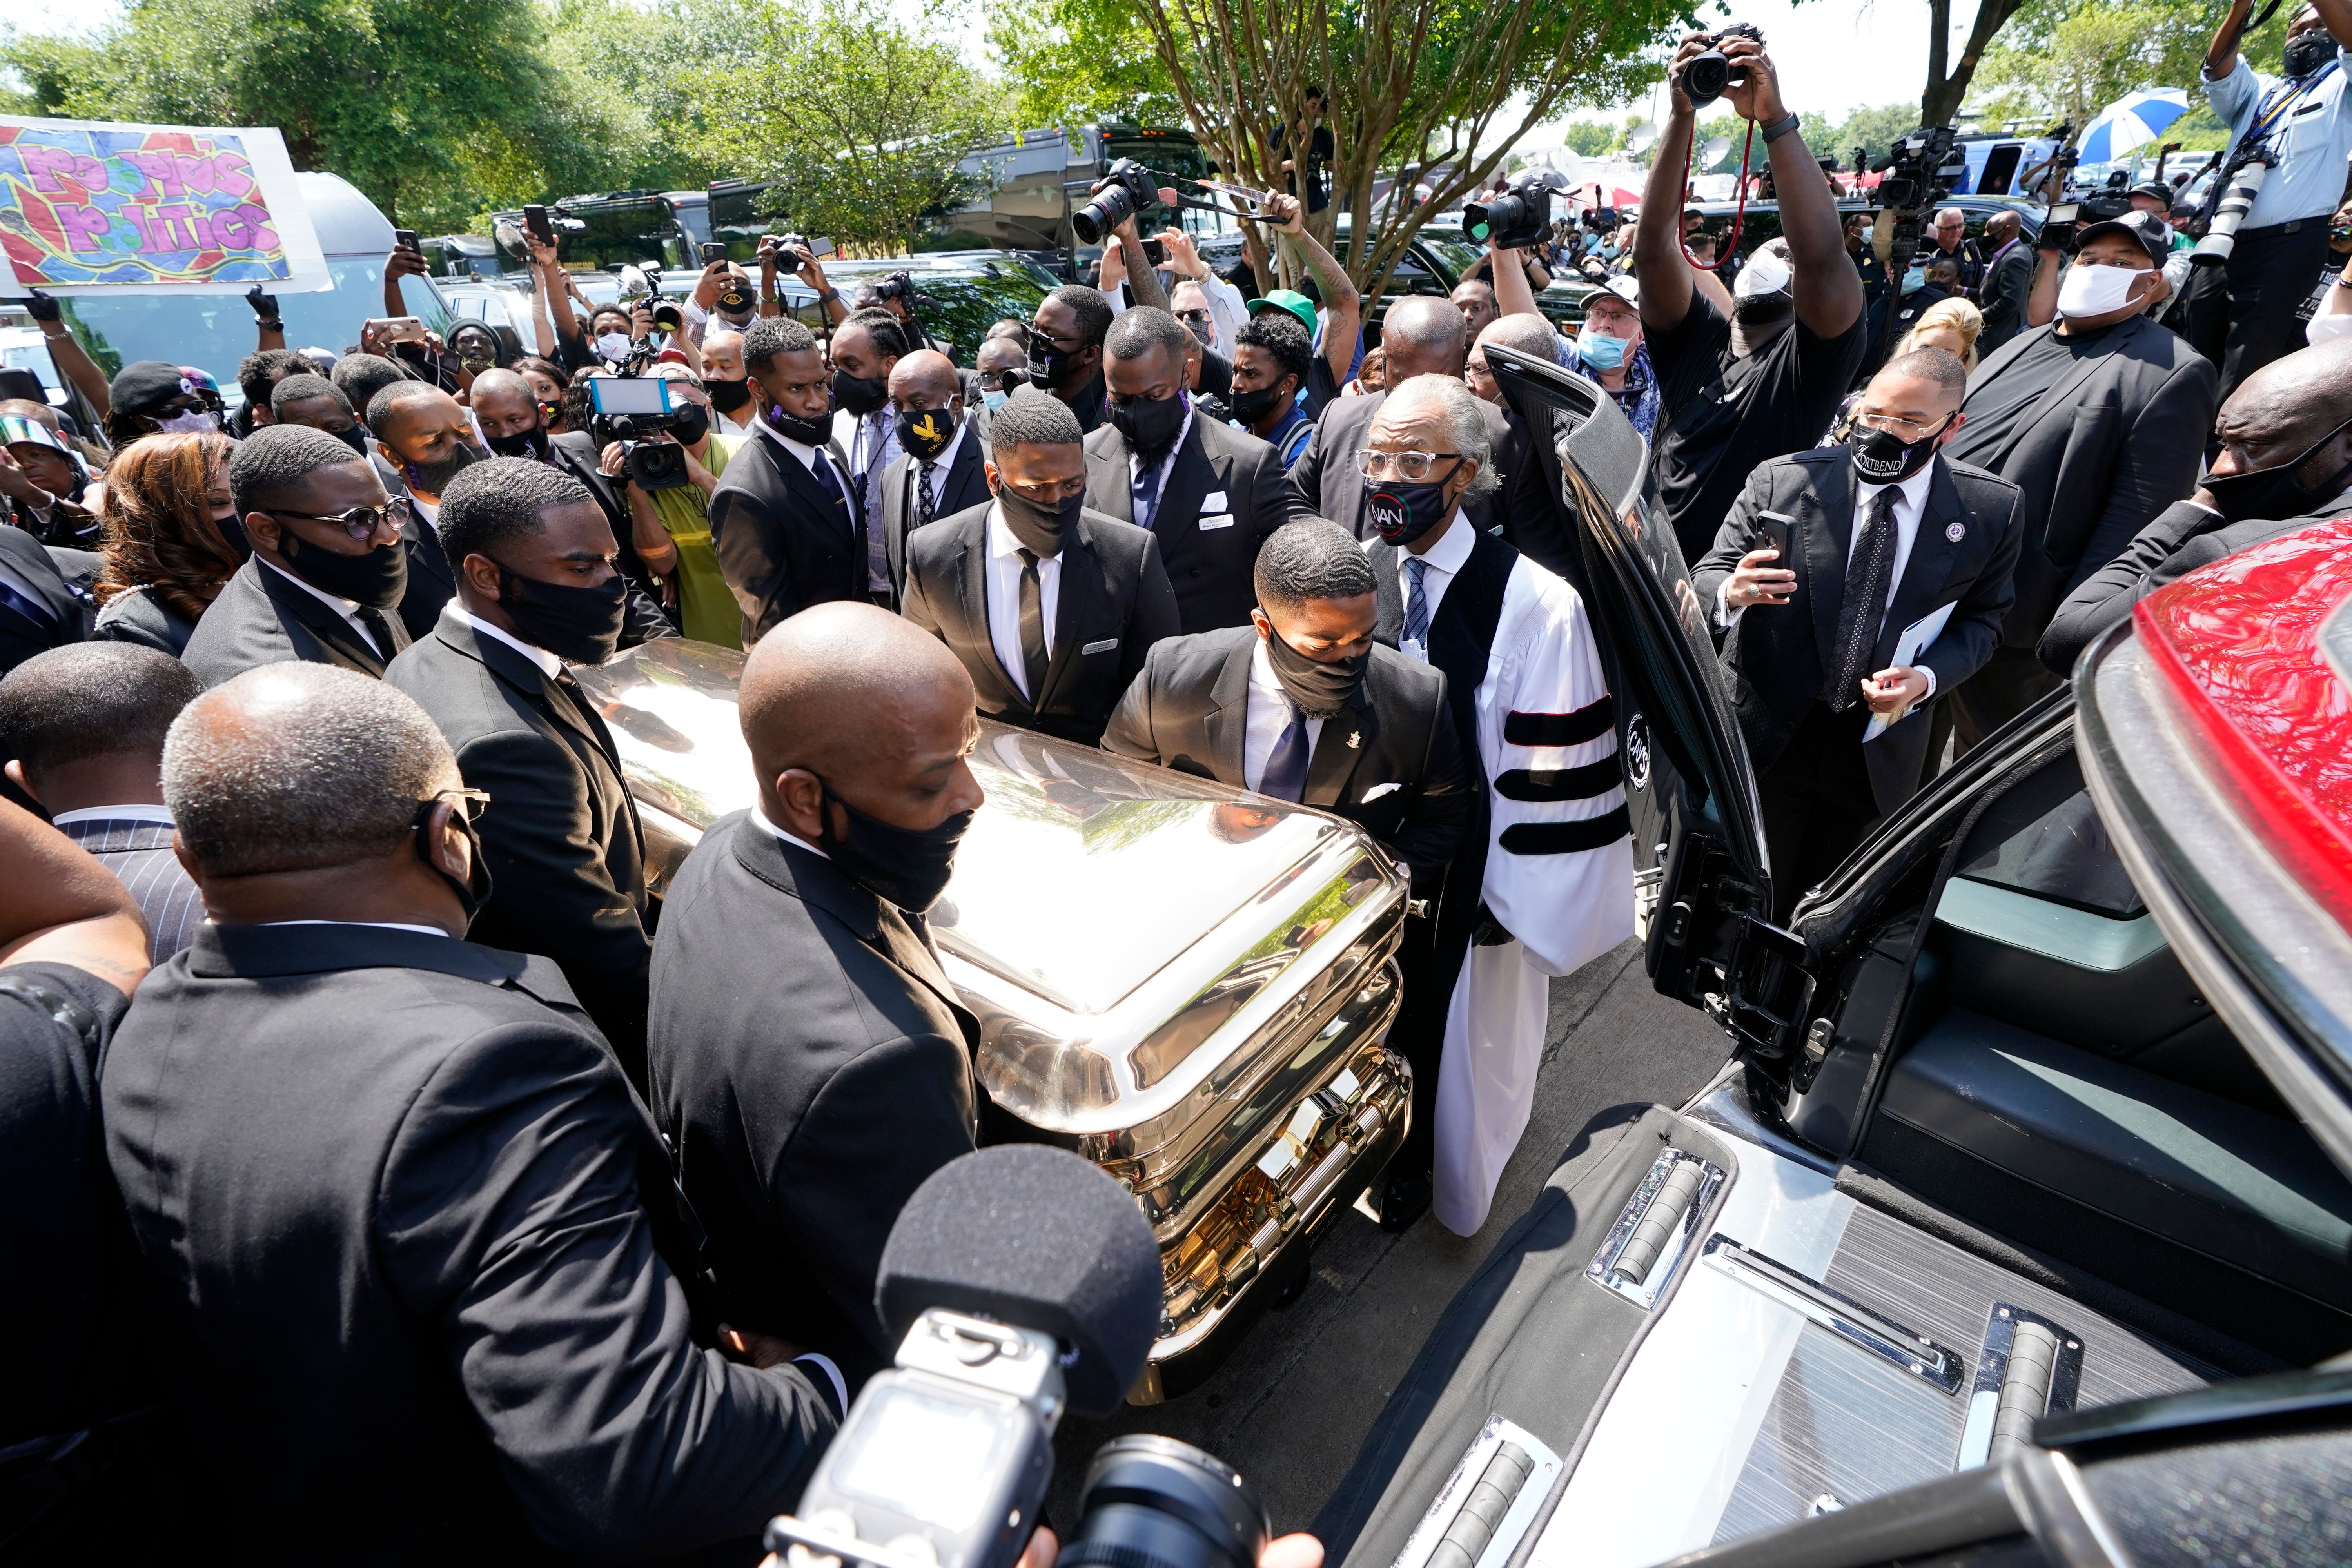 Pallbearers move the casket of George Floyd into a hearse as the Rev. Al Sharpton (C) looks on following Floyd's funeral June 9, 2020, at The Fountain of Praise church in Houston. (DAVID J. PHILLIP/POOL/AFP via Getty Images)